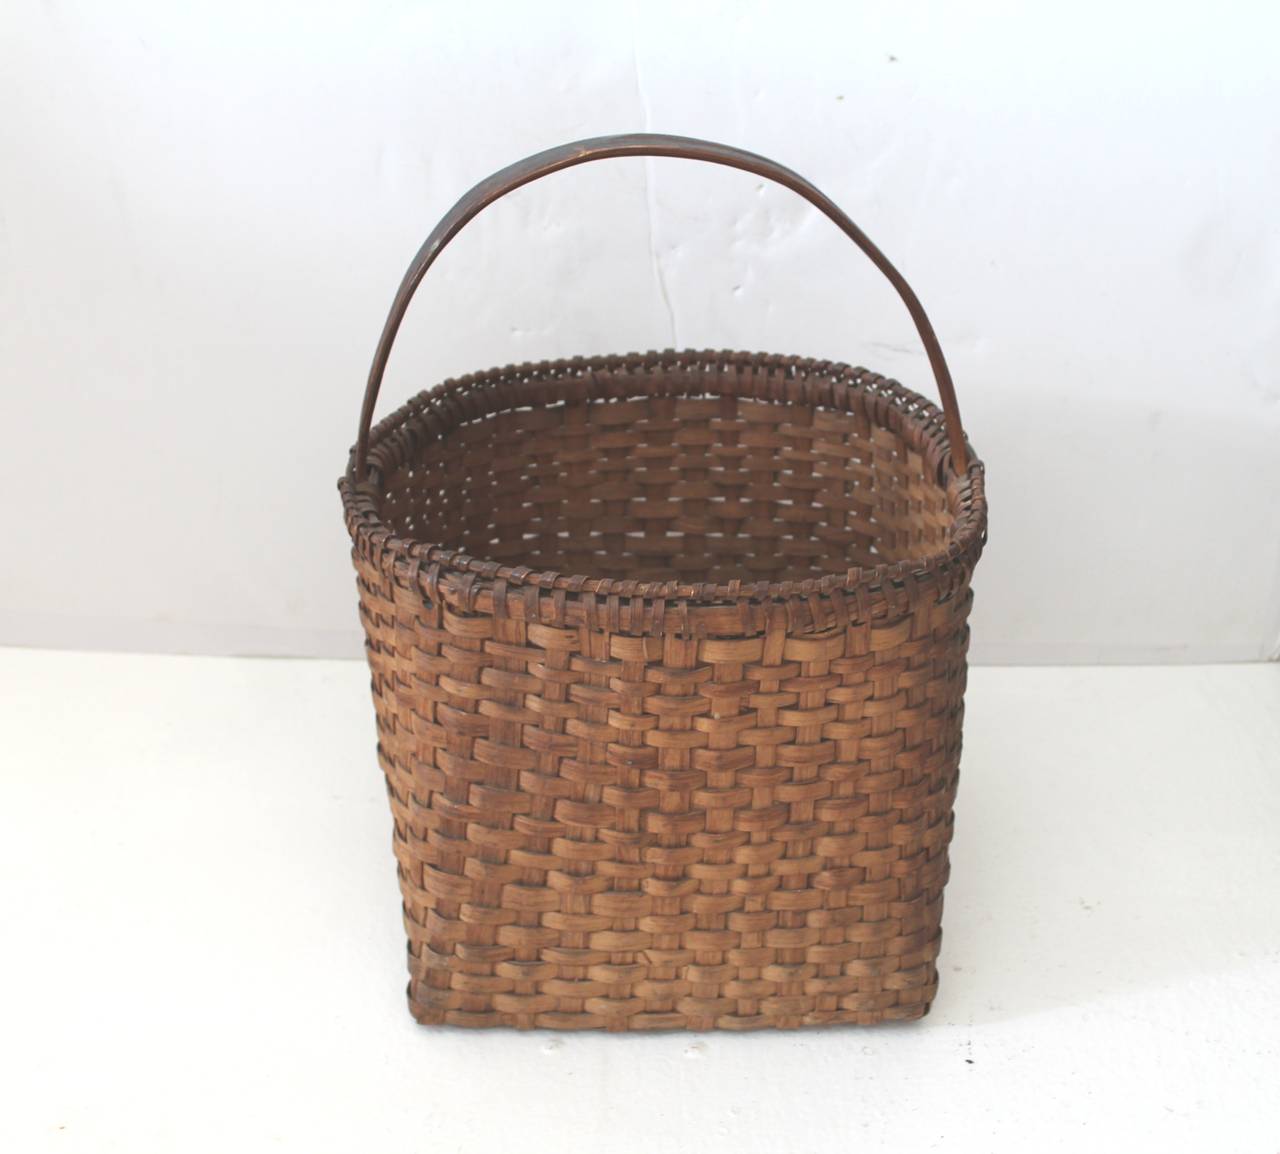 This early handmade basket is finely woven and in great condition. The wonderful double wrap rim is in great as found condition. The basket has a wonderful mellow patina. Great untouched surface.